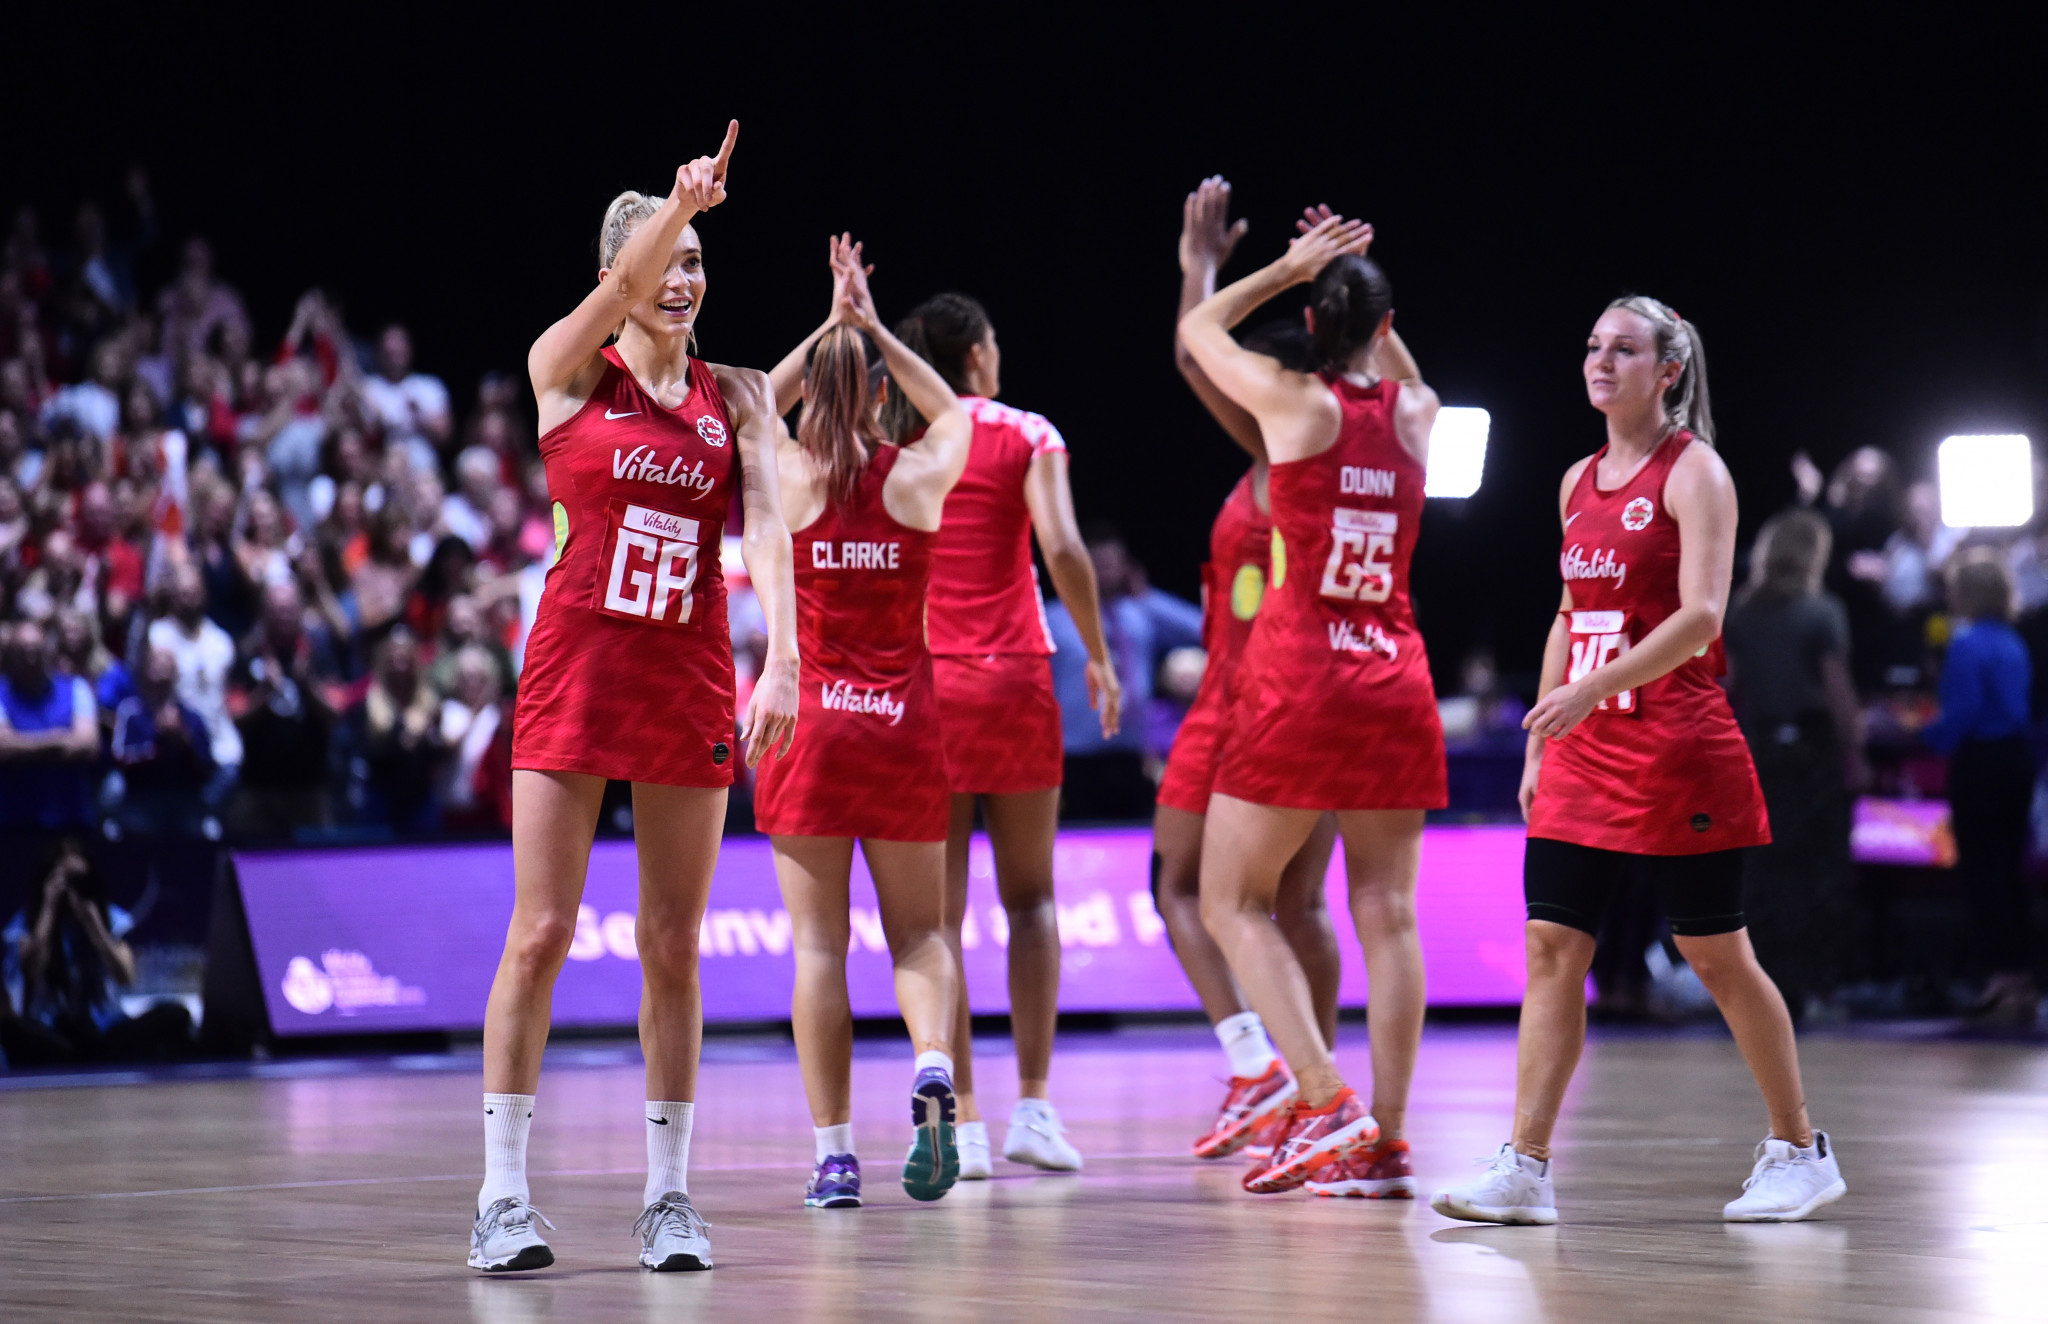 Hosts England and South Africa qualify for Netball World Cup semi-finals